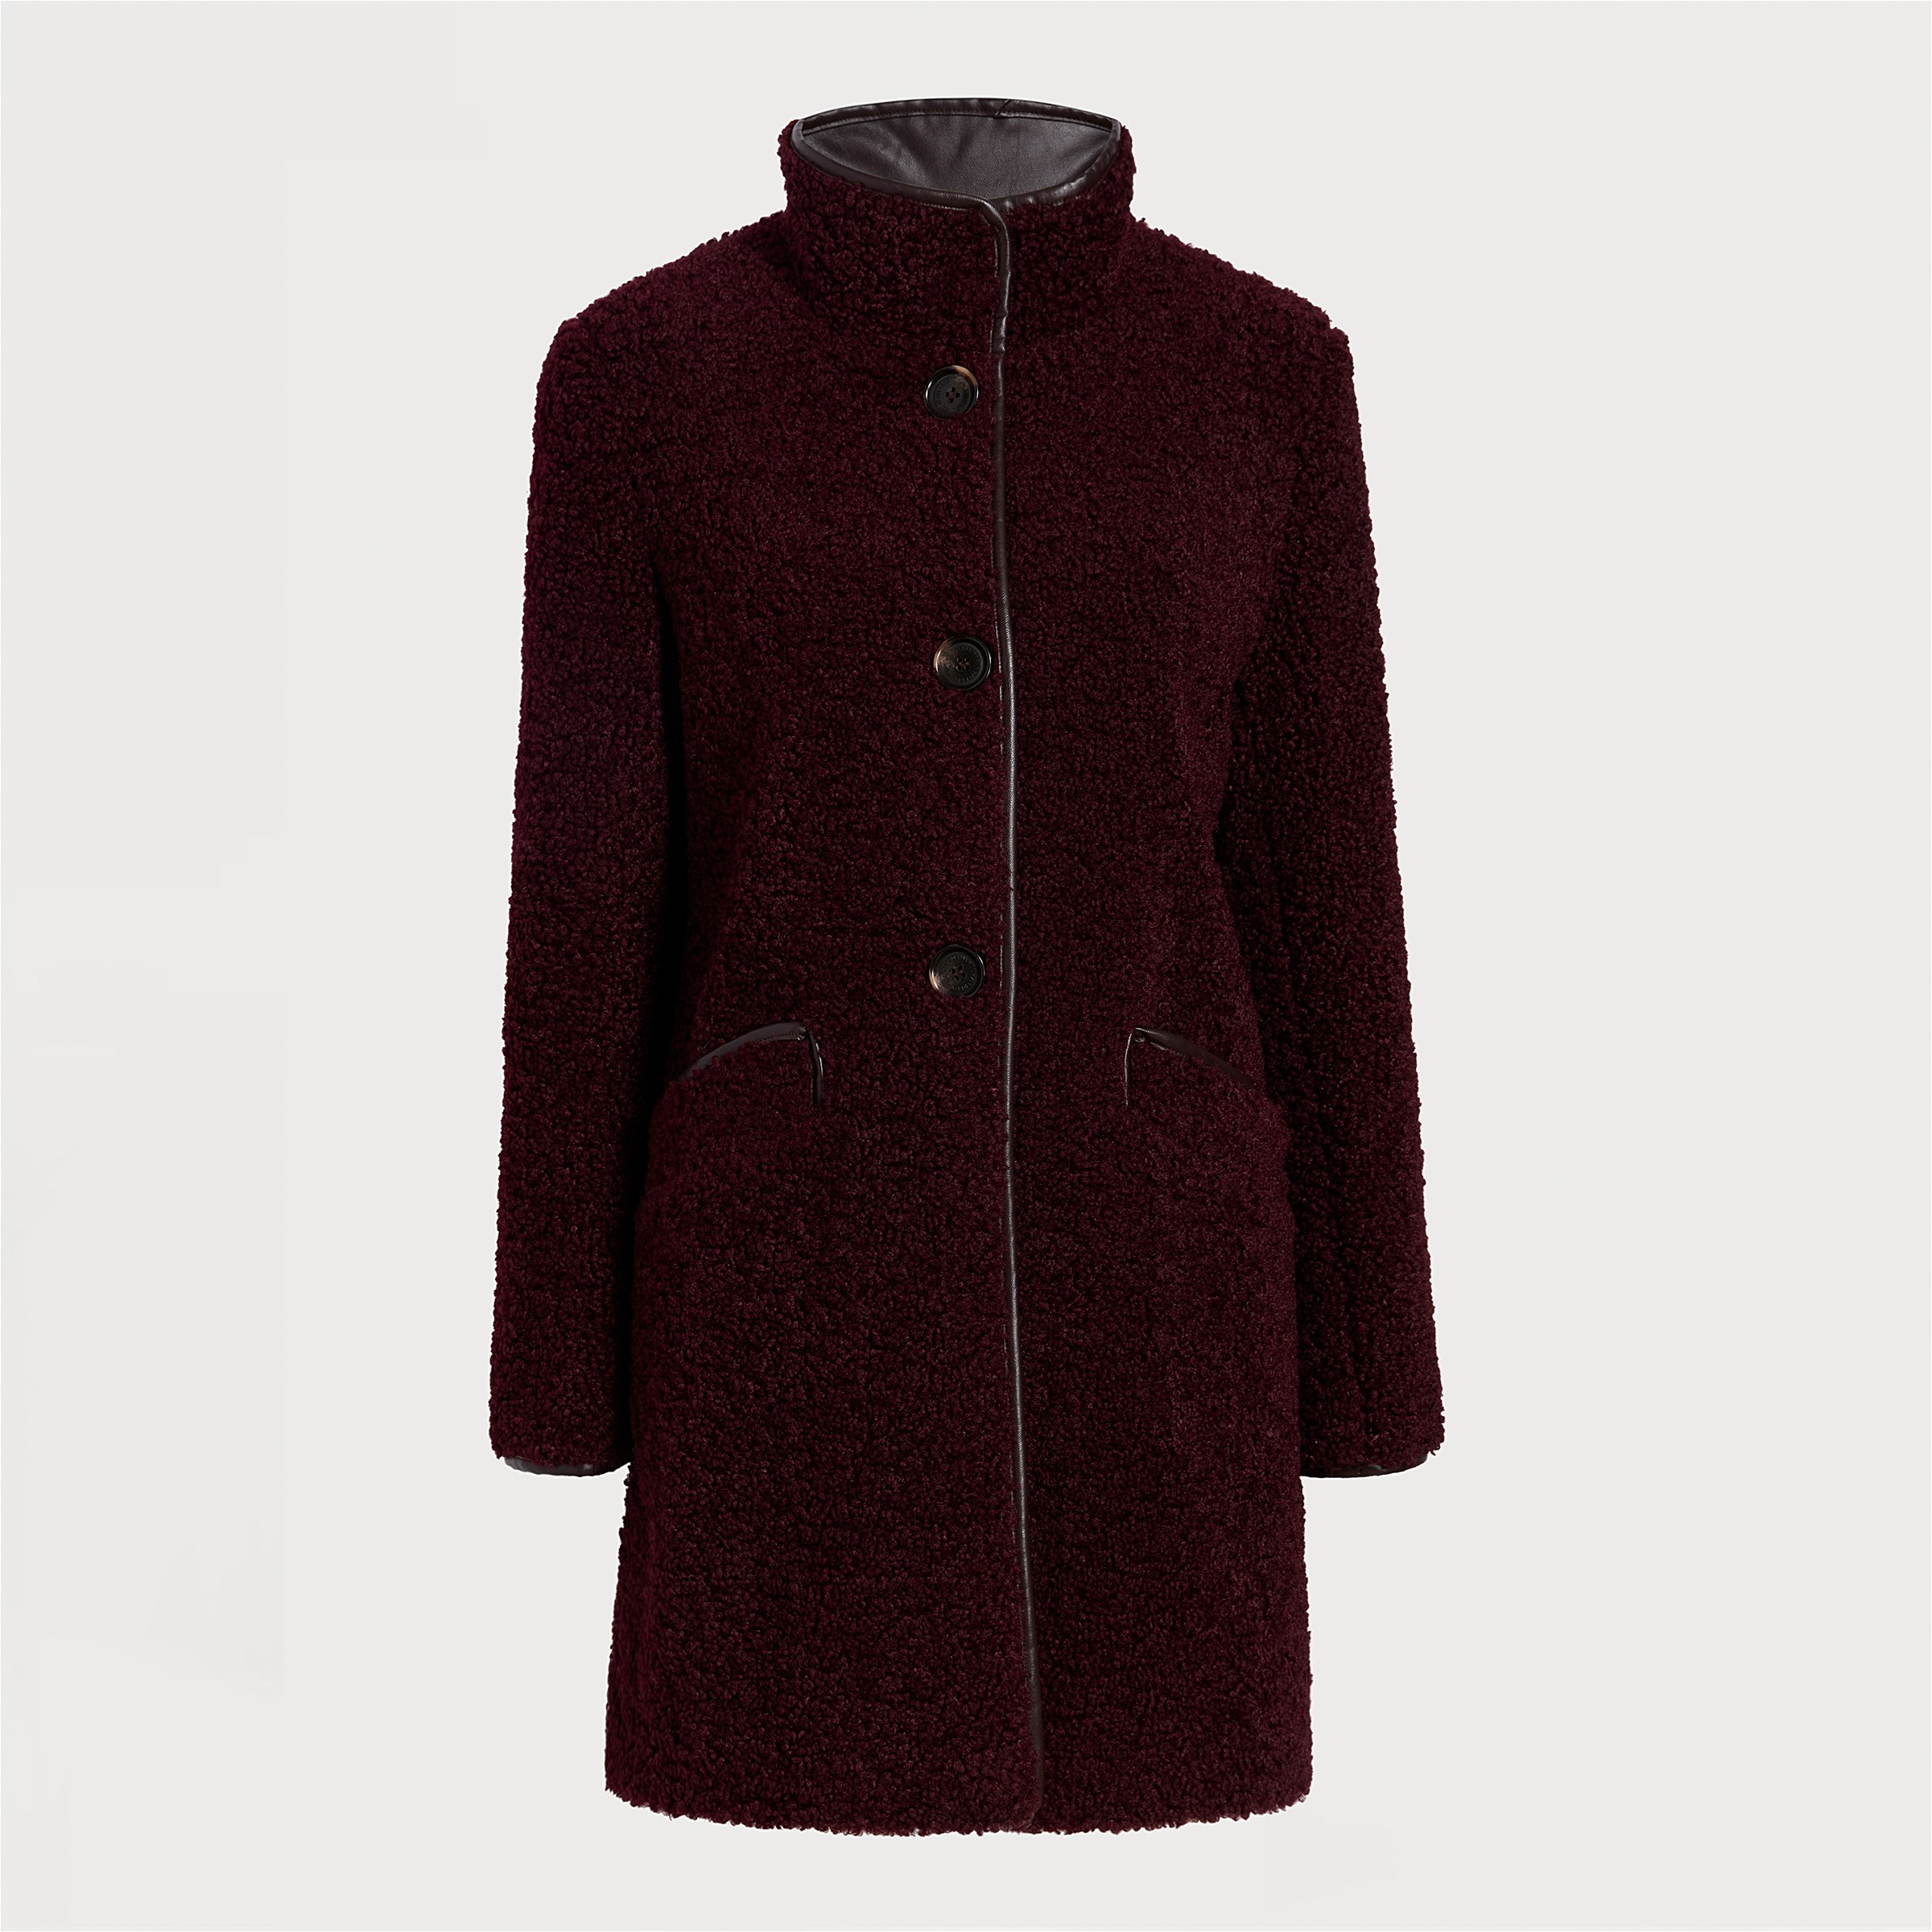 Buy Jacqueline Silver Borg Teddy Coat | SilkFred US